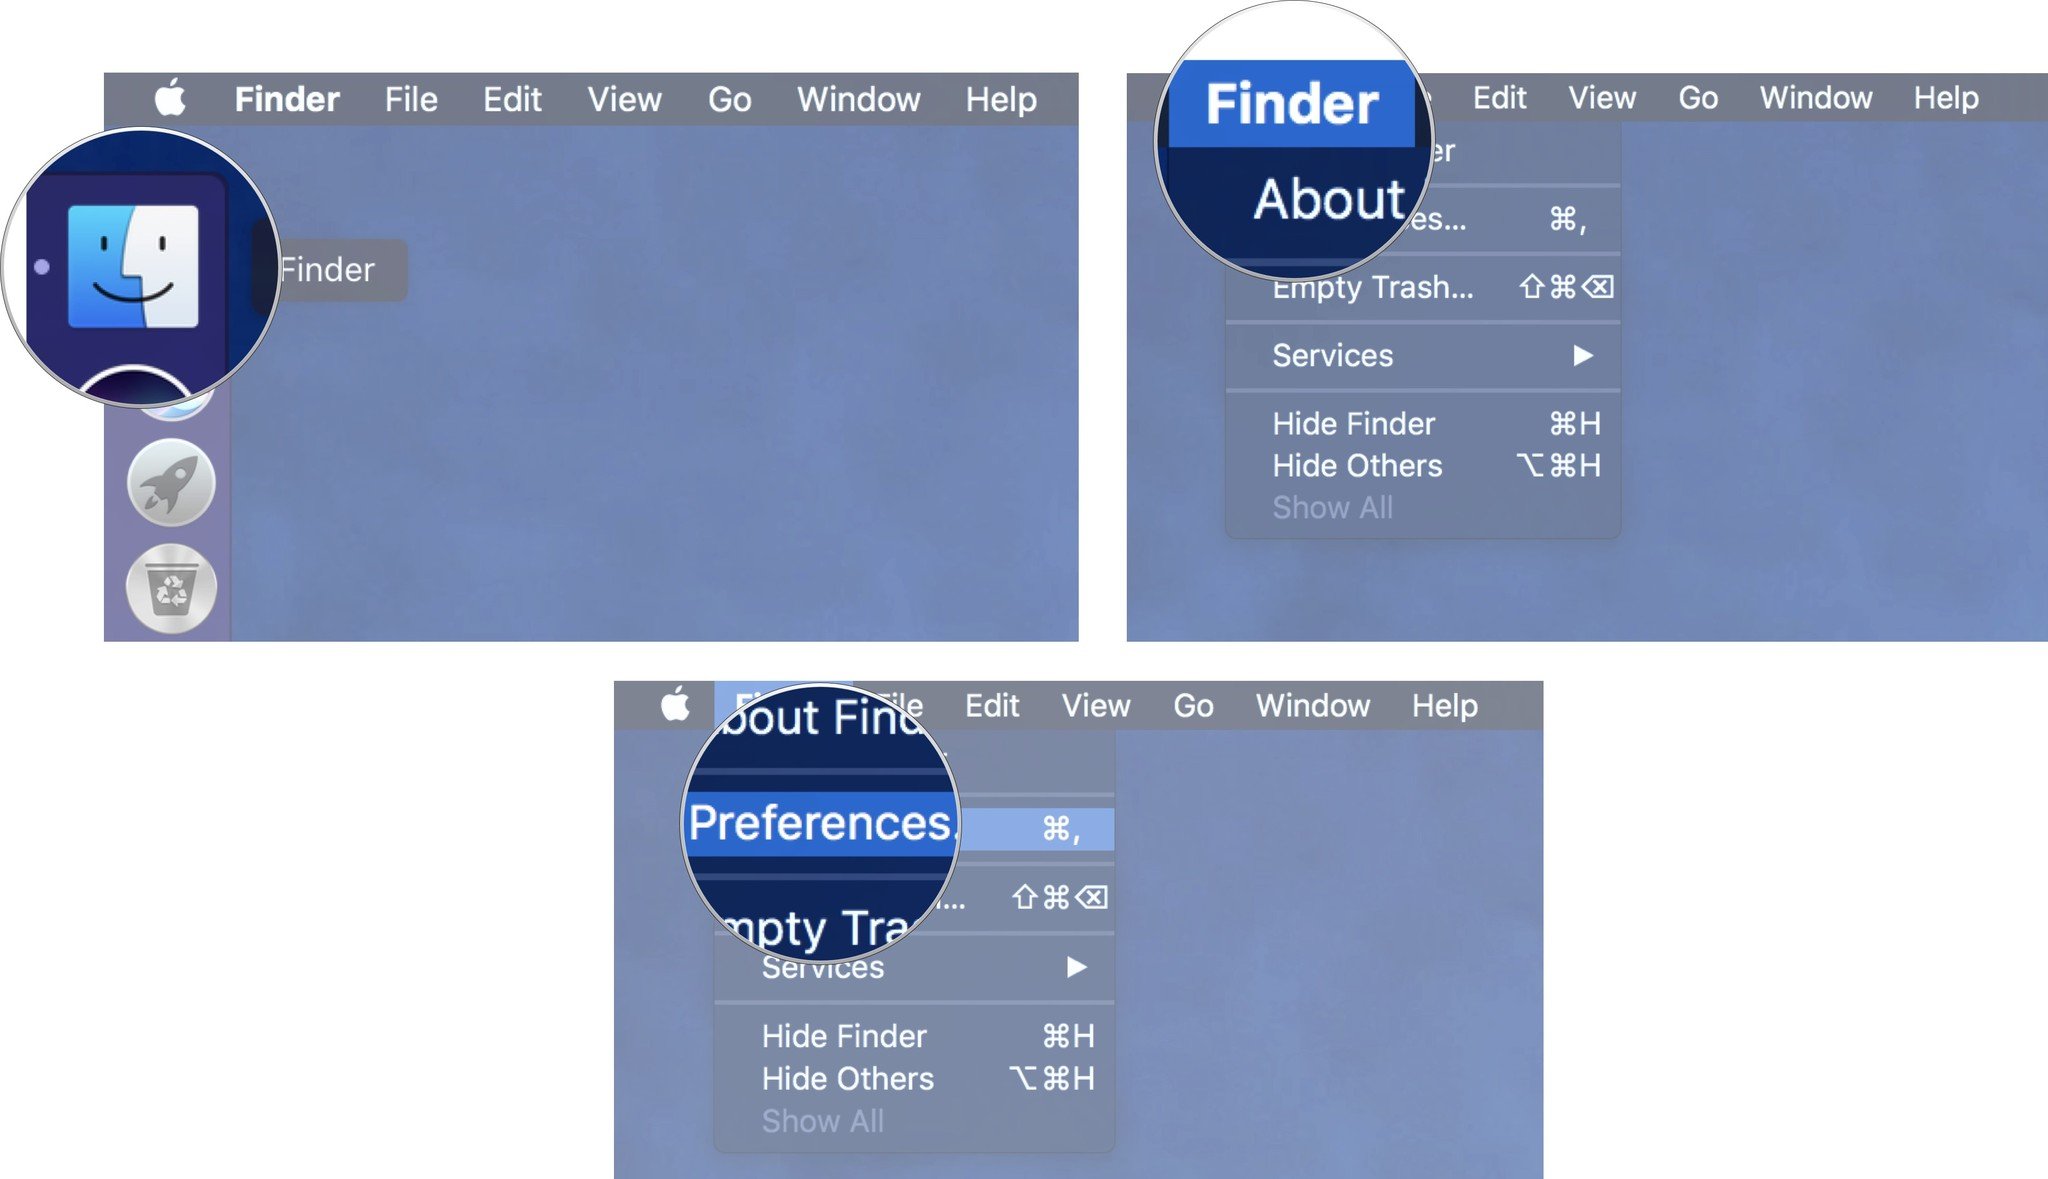 Launch finder, then click Preferences, 